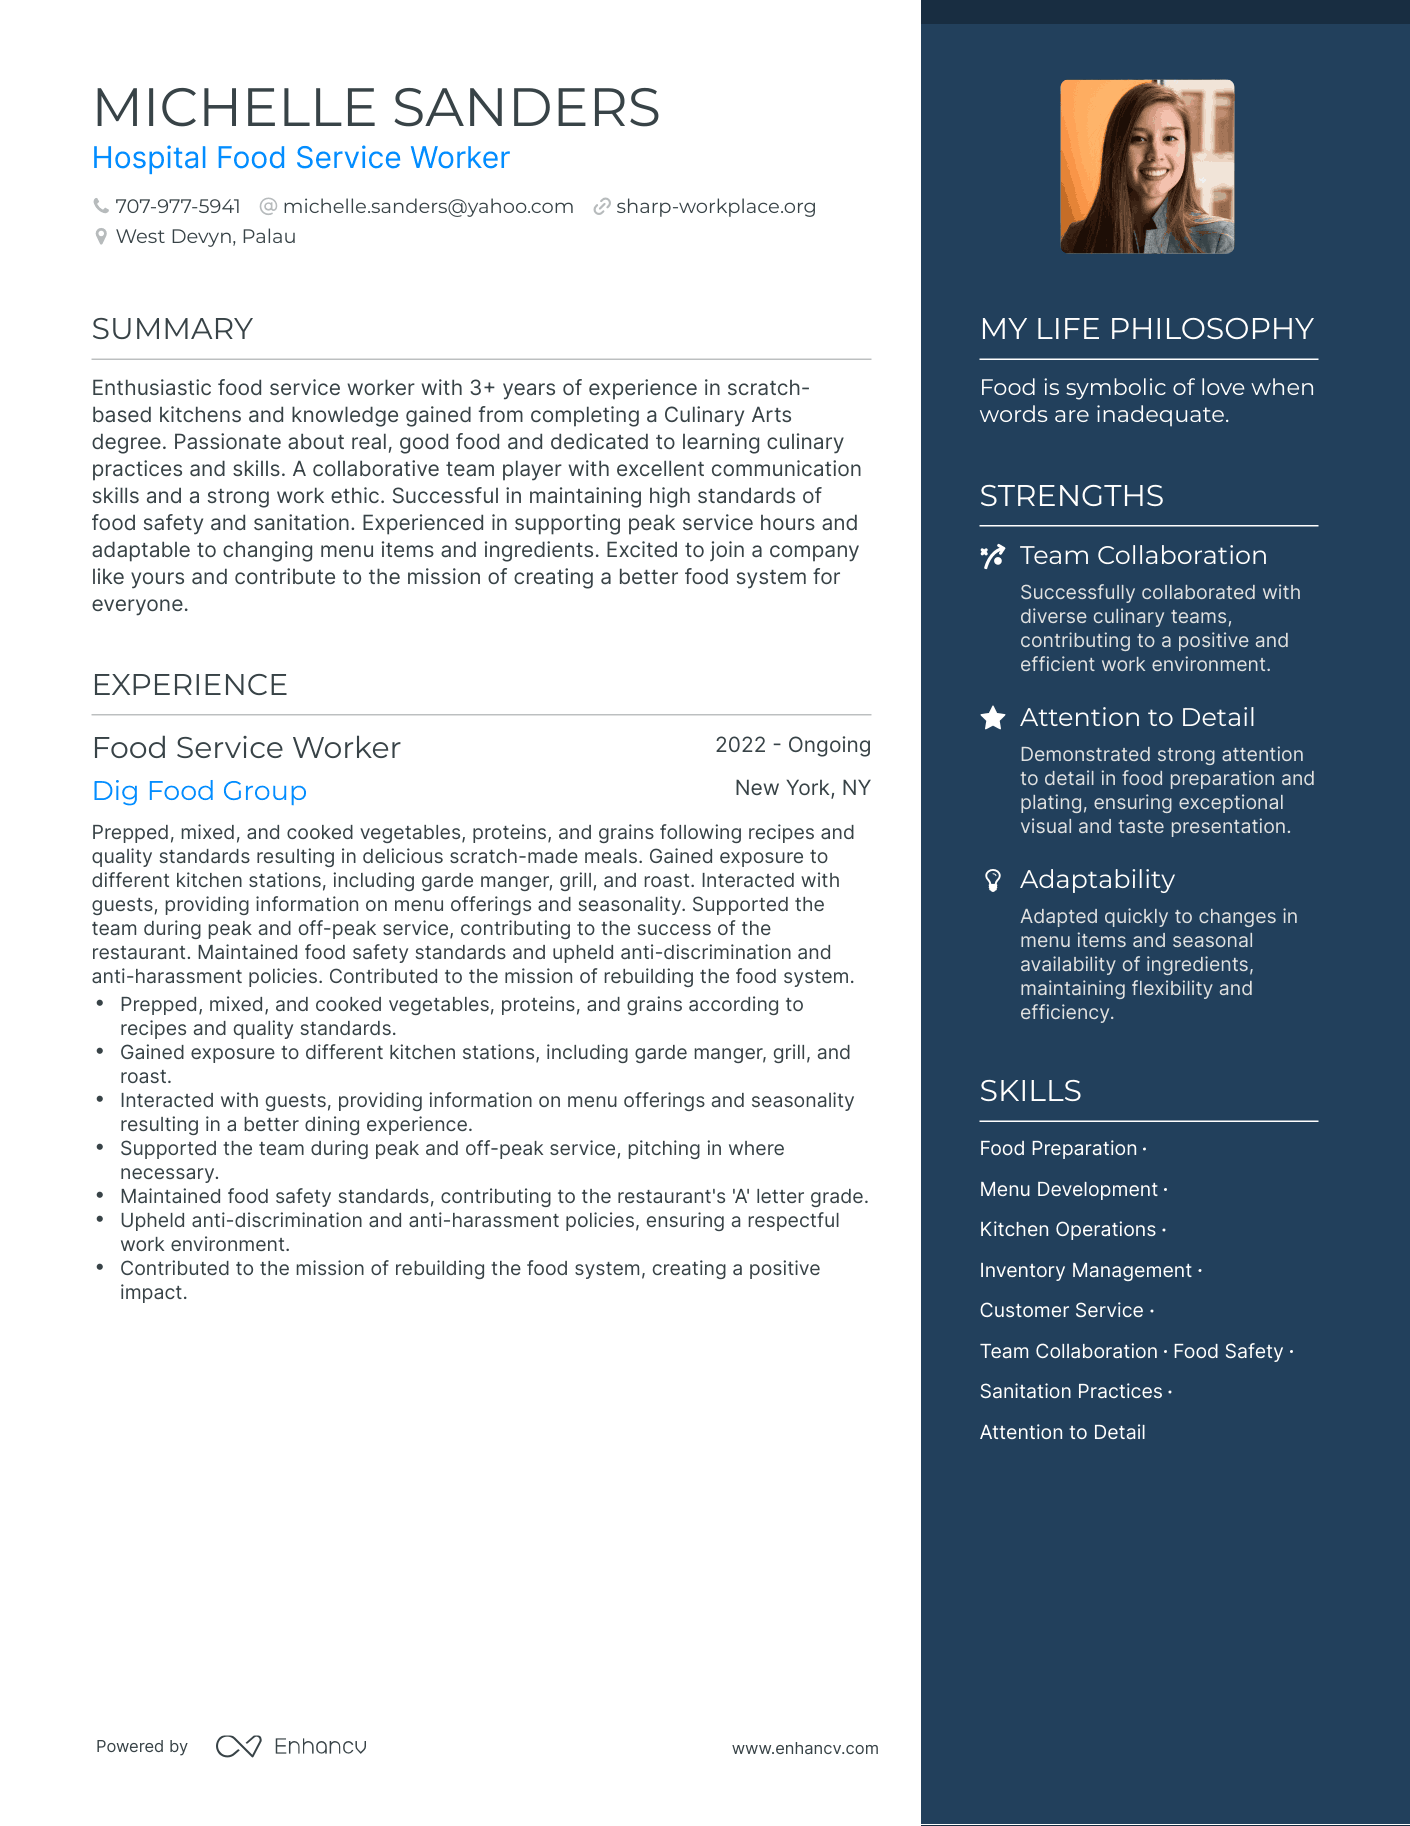 Hospital Food Service Worker resume example